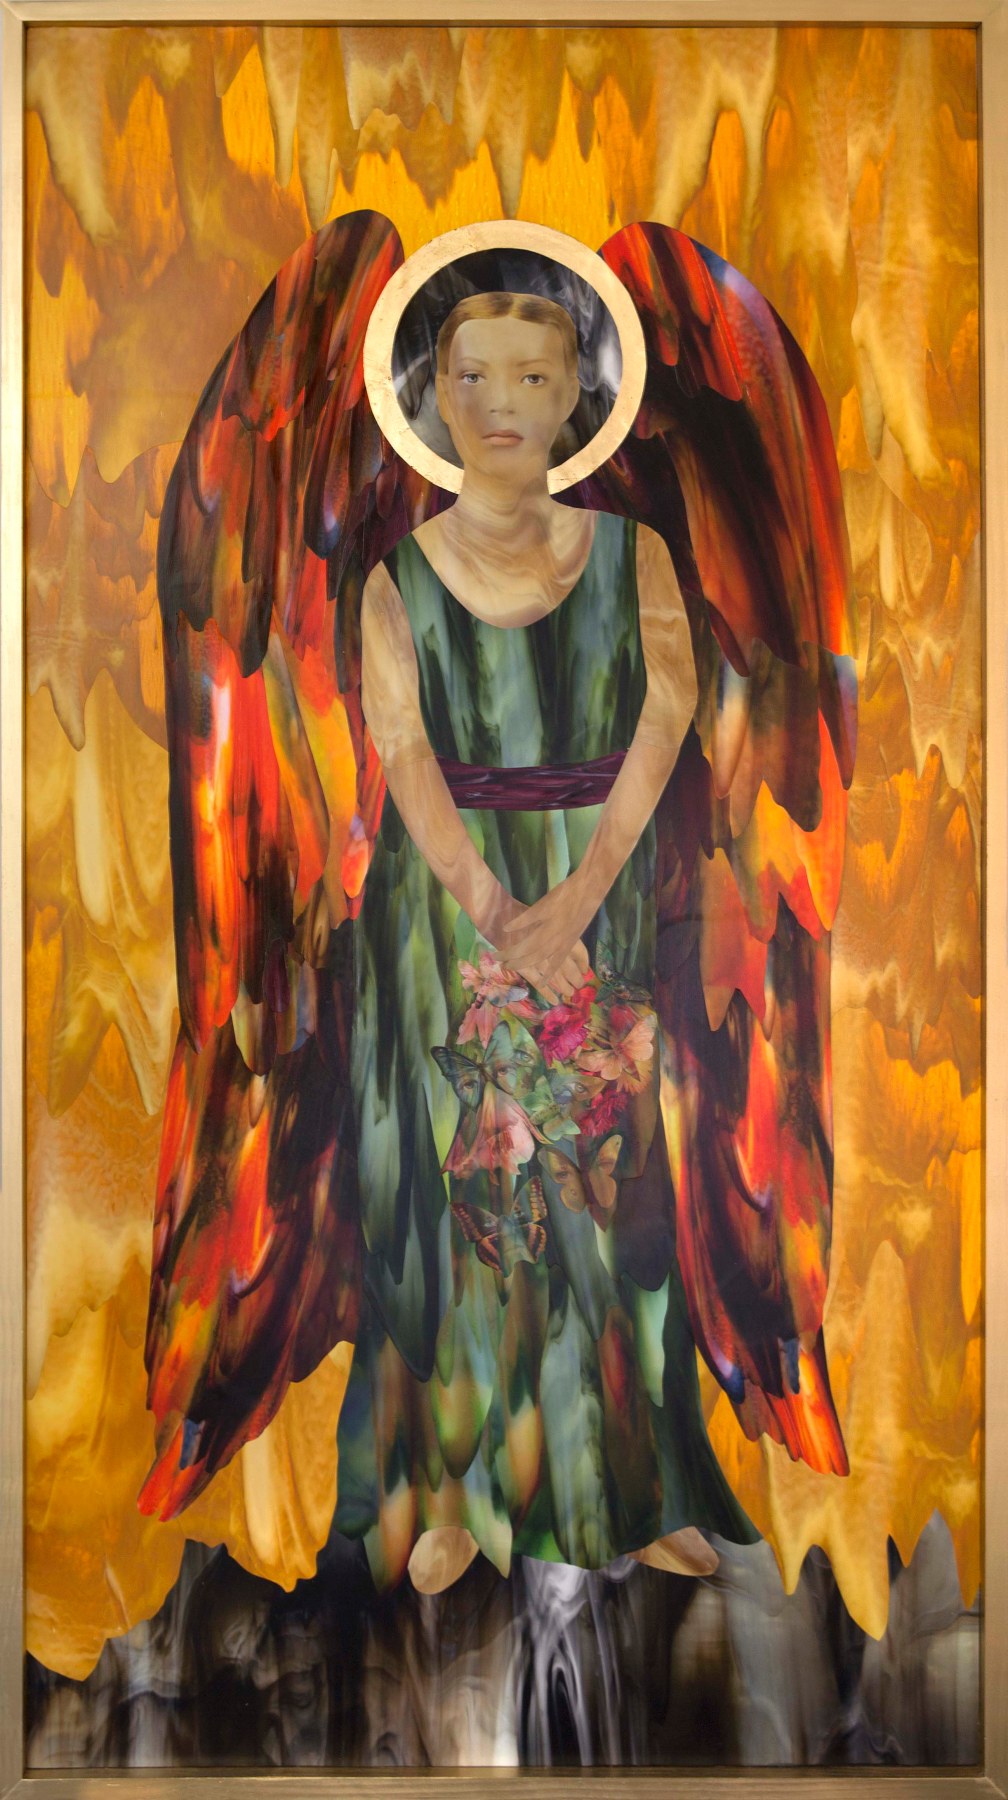 The Angel Waits, 2016, Collage and gold leaf on panel